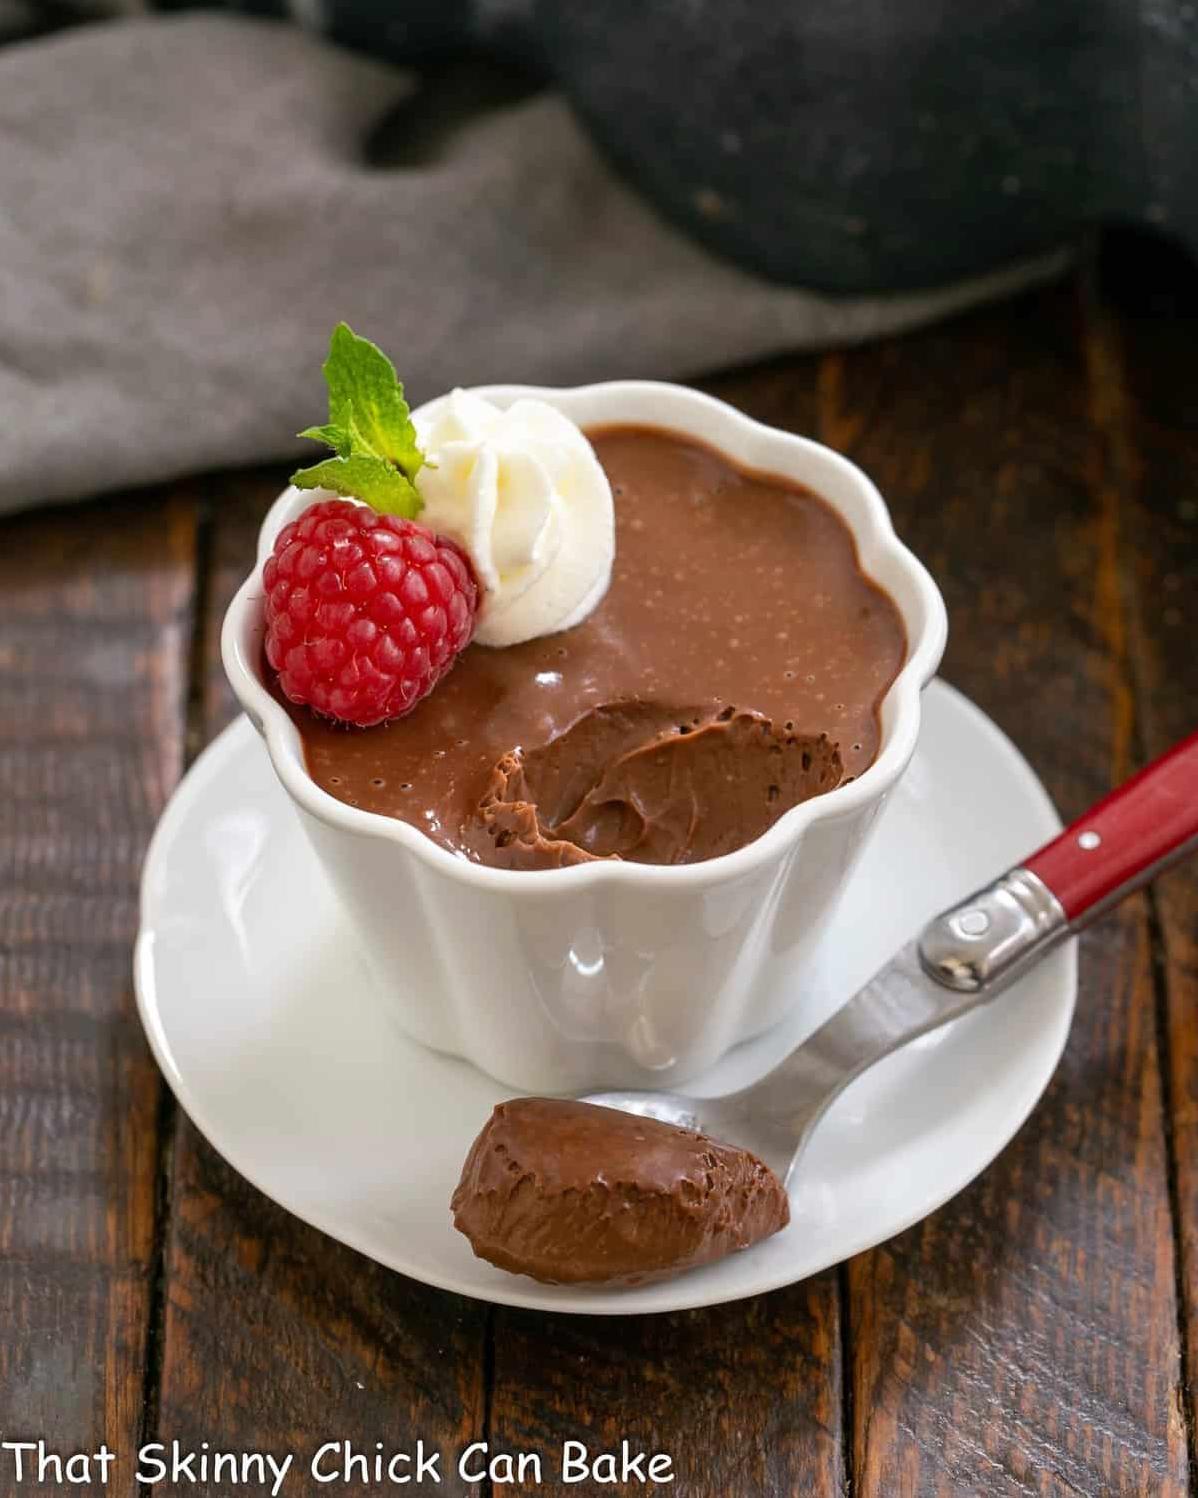  Dive into this scrumptious chocolatey delight